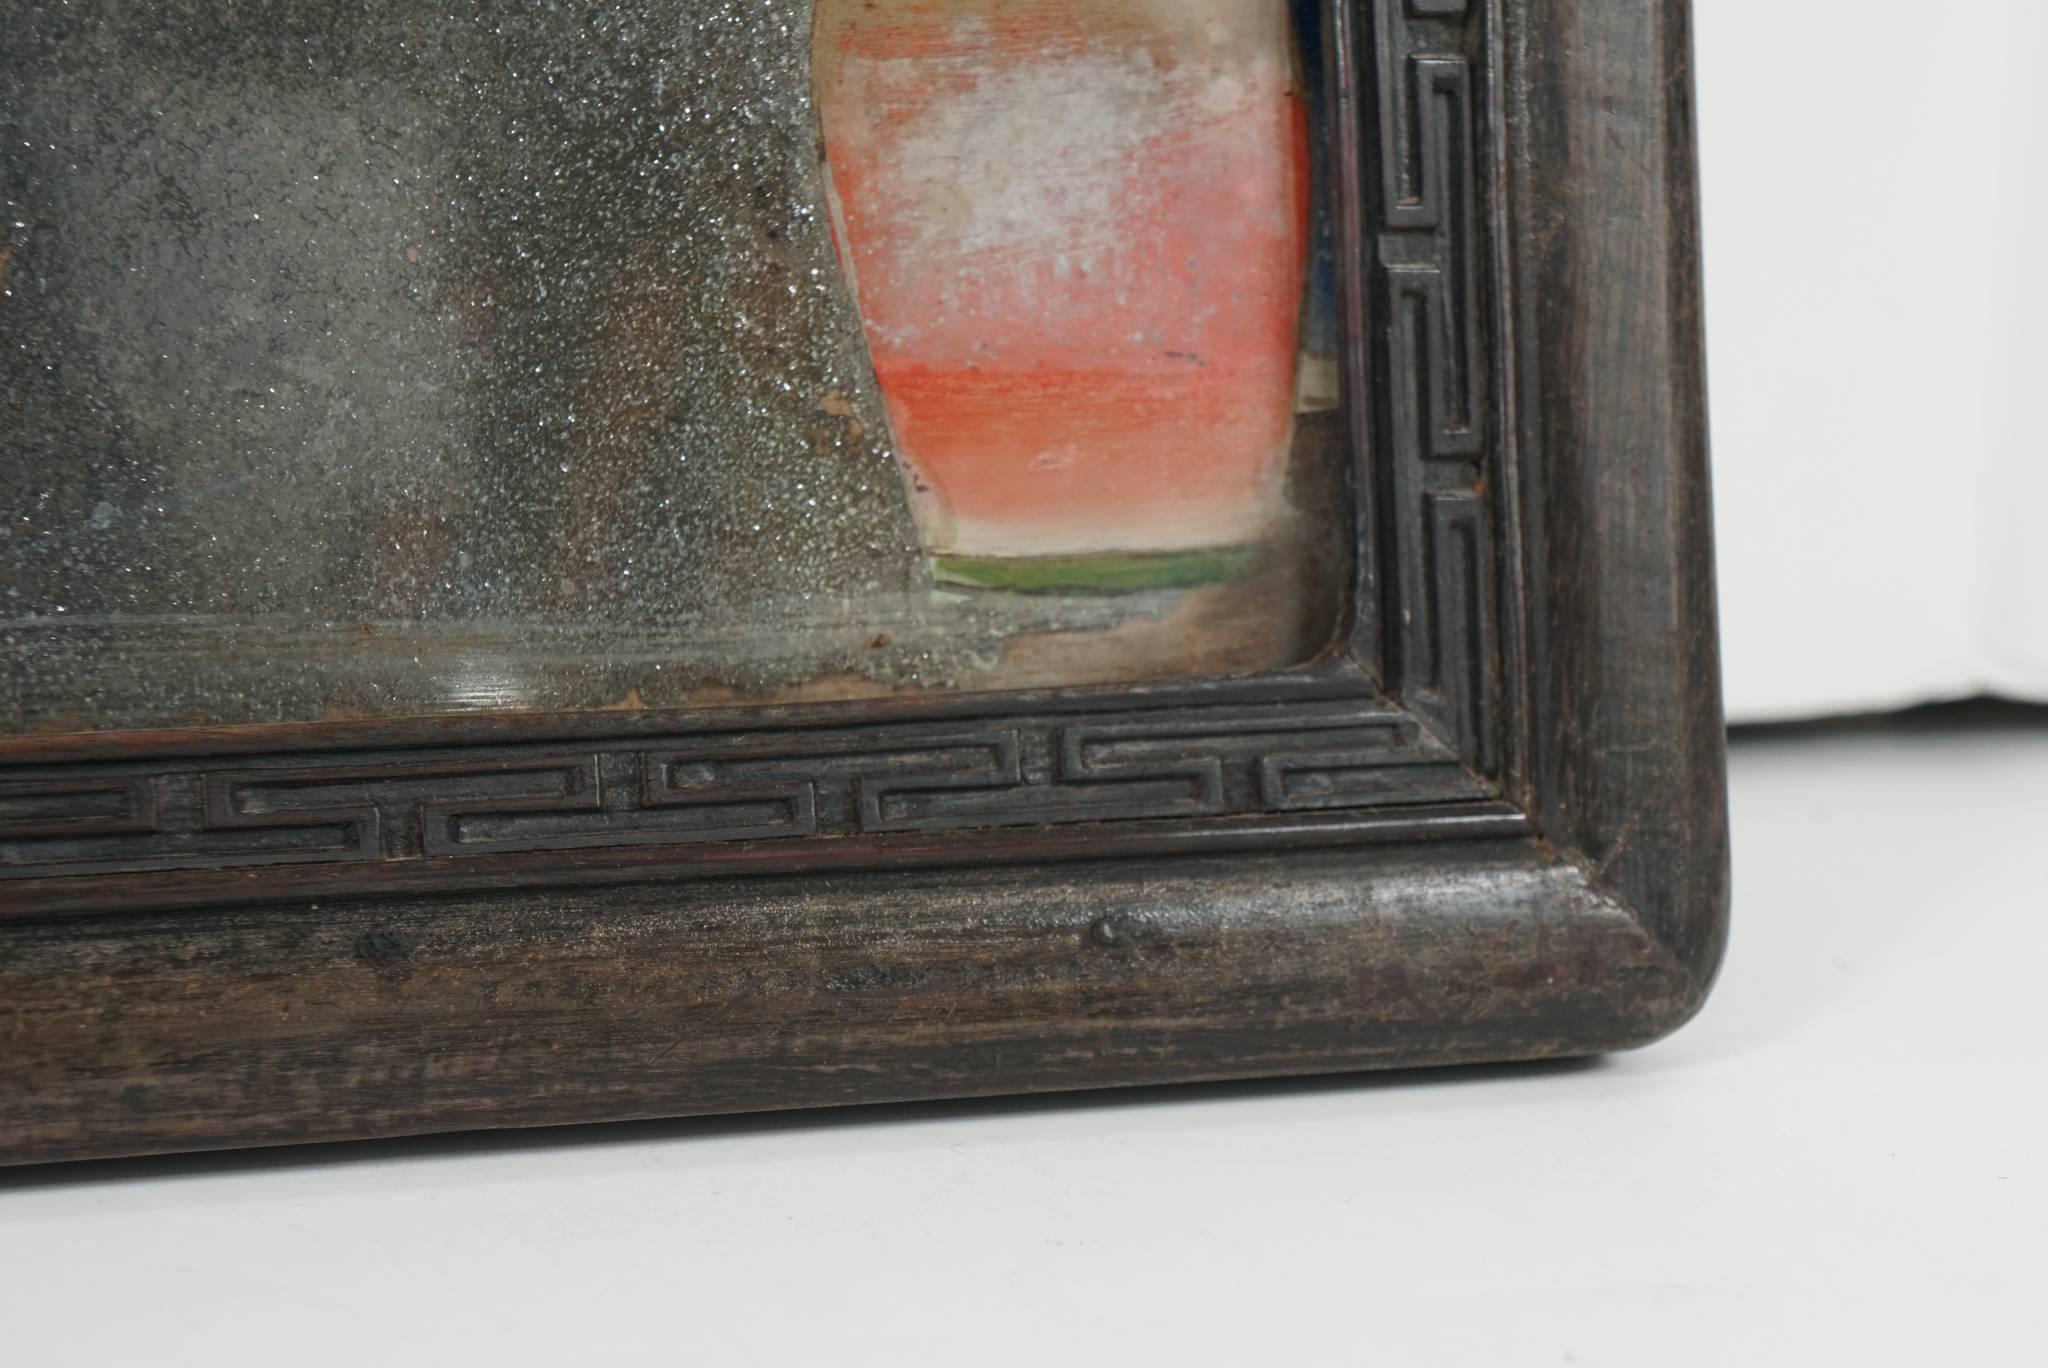 Set of Late 18th-Early 19th Century Chinese Reverse Paintings on Glass 5